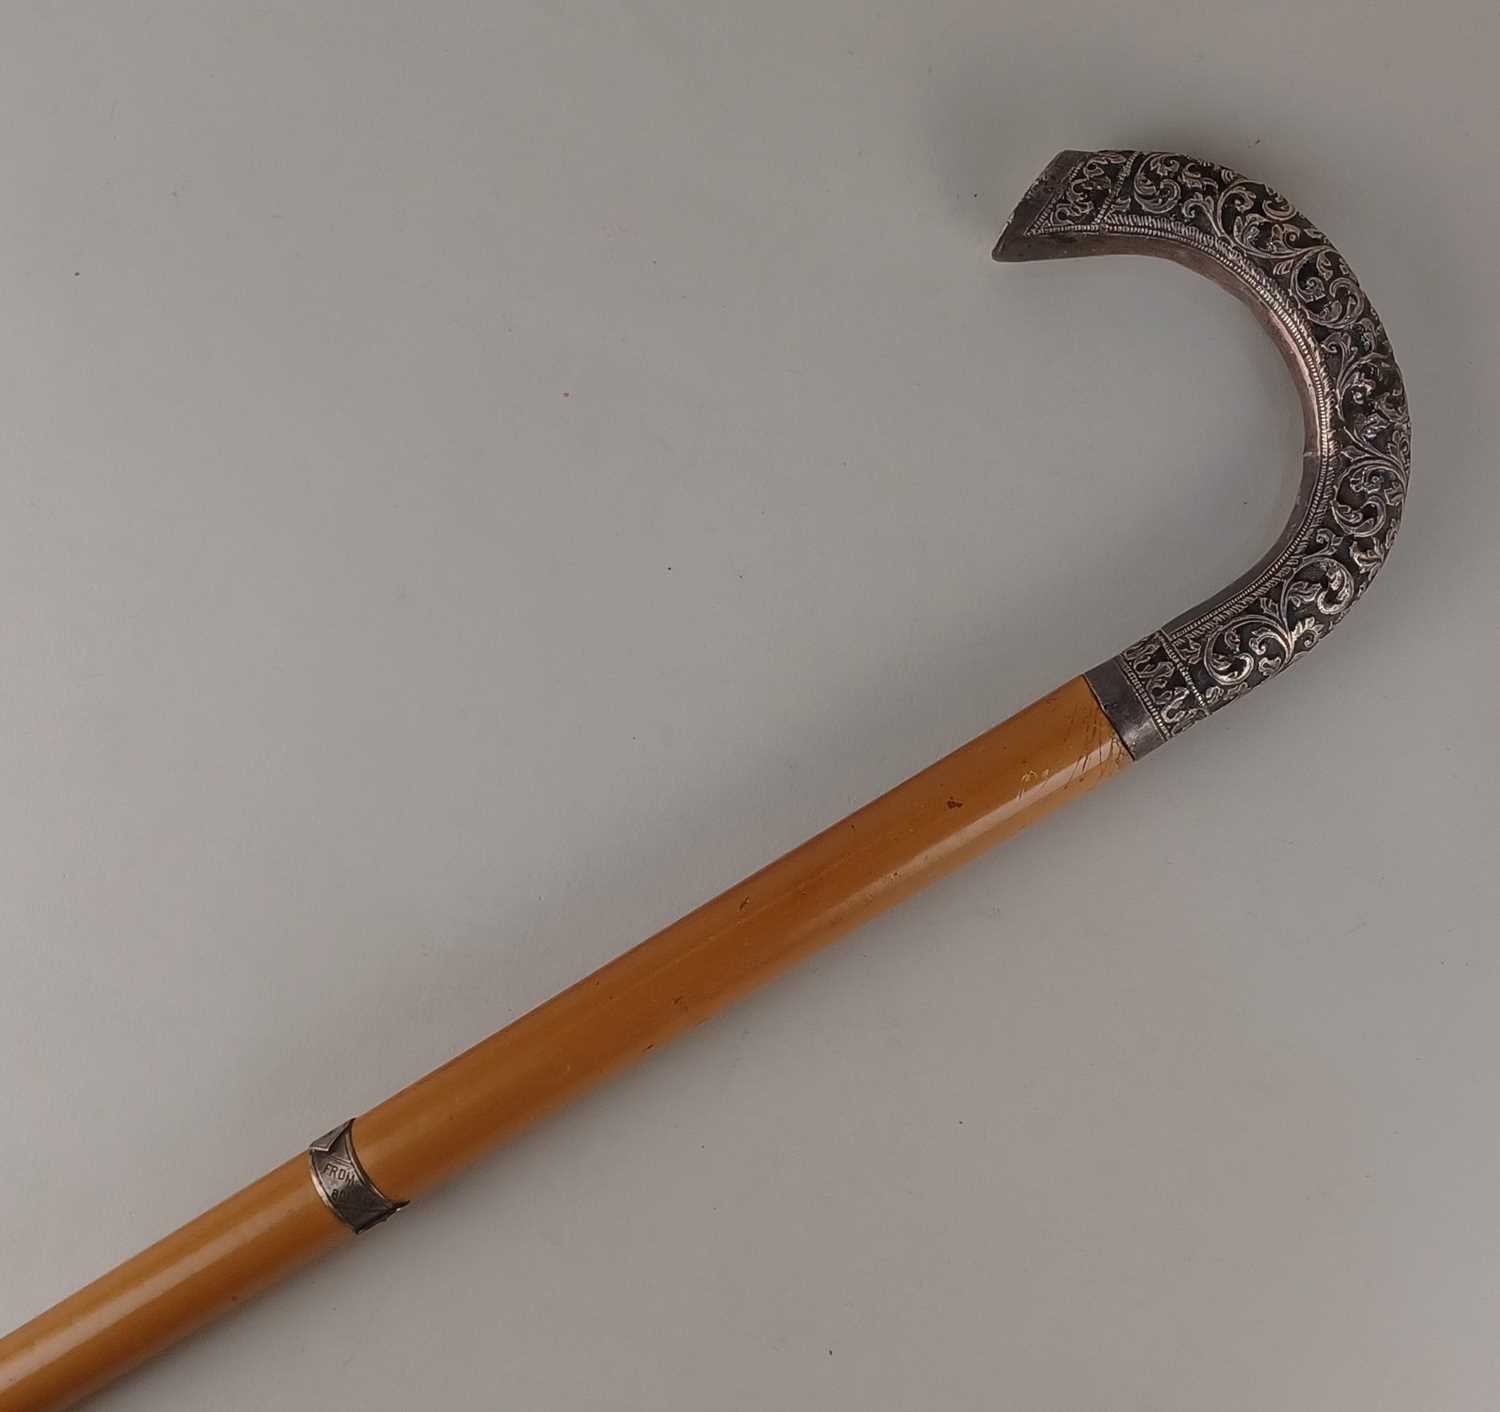 An early 20th century Indian walking cane the white metal mounted handle with embossed floral